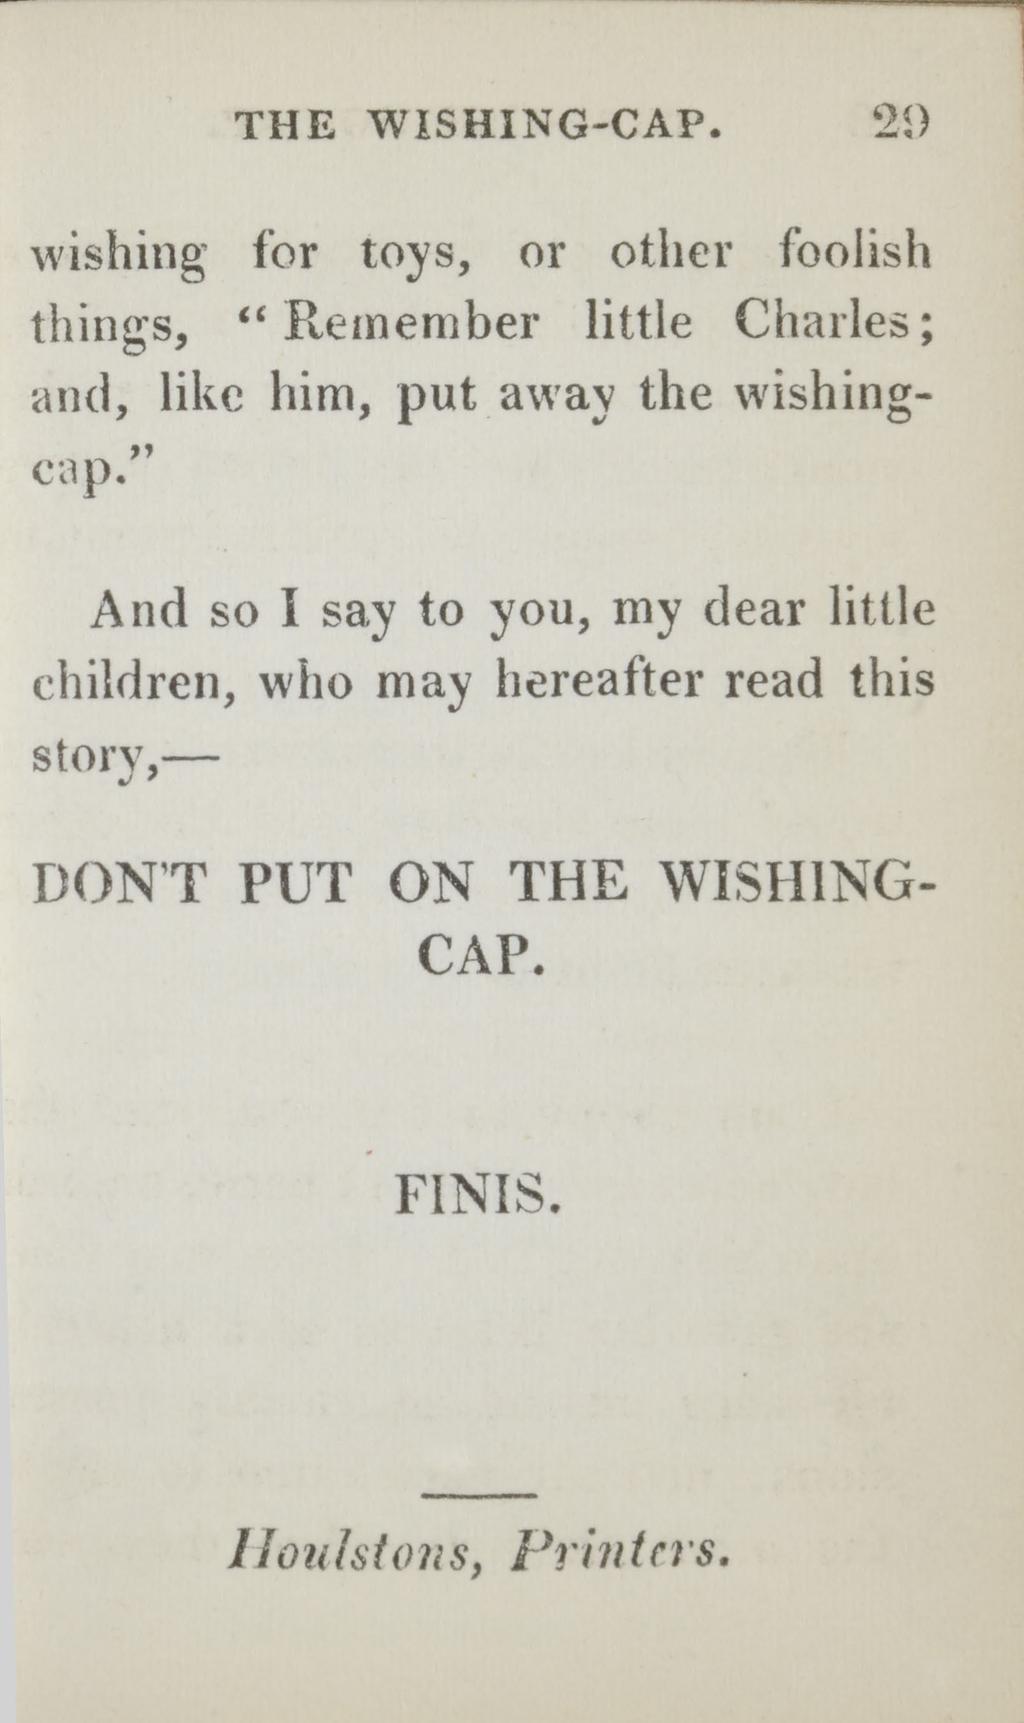 THE WISHING-CAP. 29 wishing for toys, or other foolish things, Remember little Charles; and, like him, put away the wishingcap.